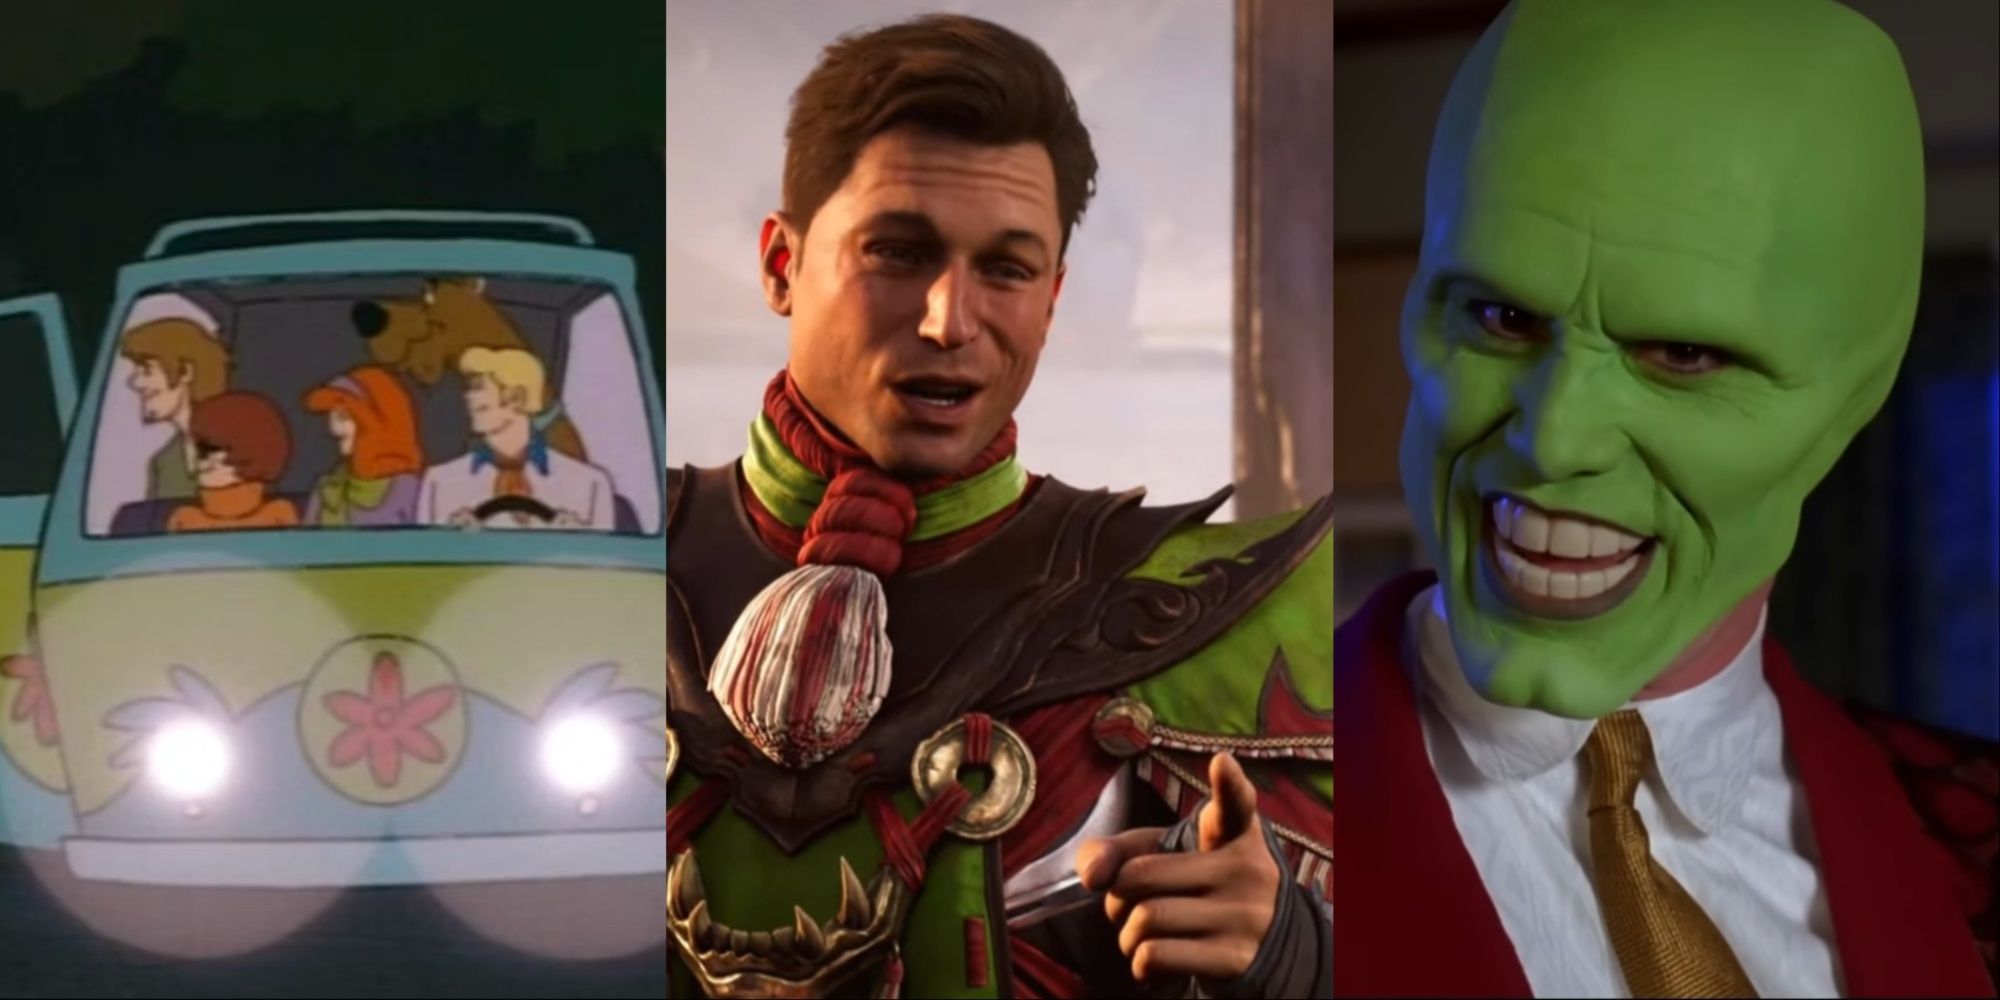 A split-image of the Mystery gang in their van in an episode of Scooby-Doo, Johnny with his James Bond reference in the Kampaign, and Jim Carrey as Stanley Ipkiss in The Mask.